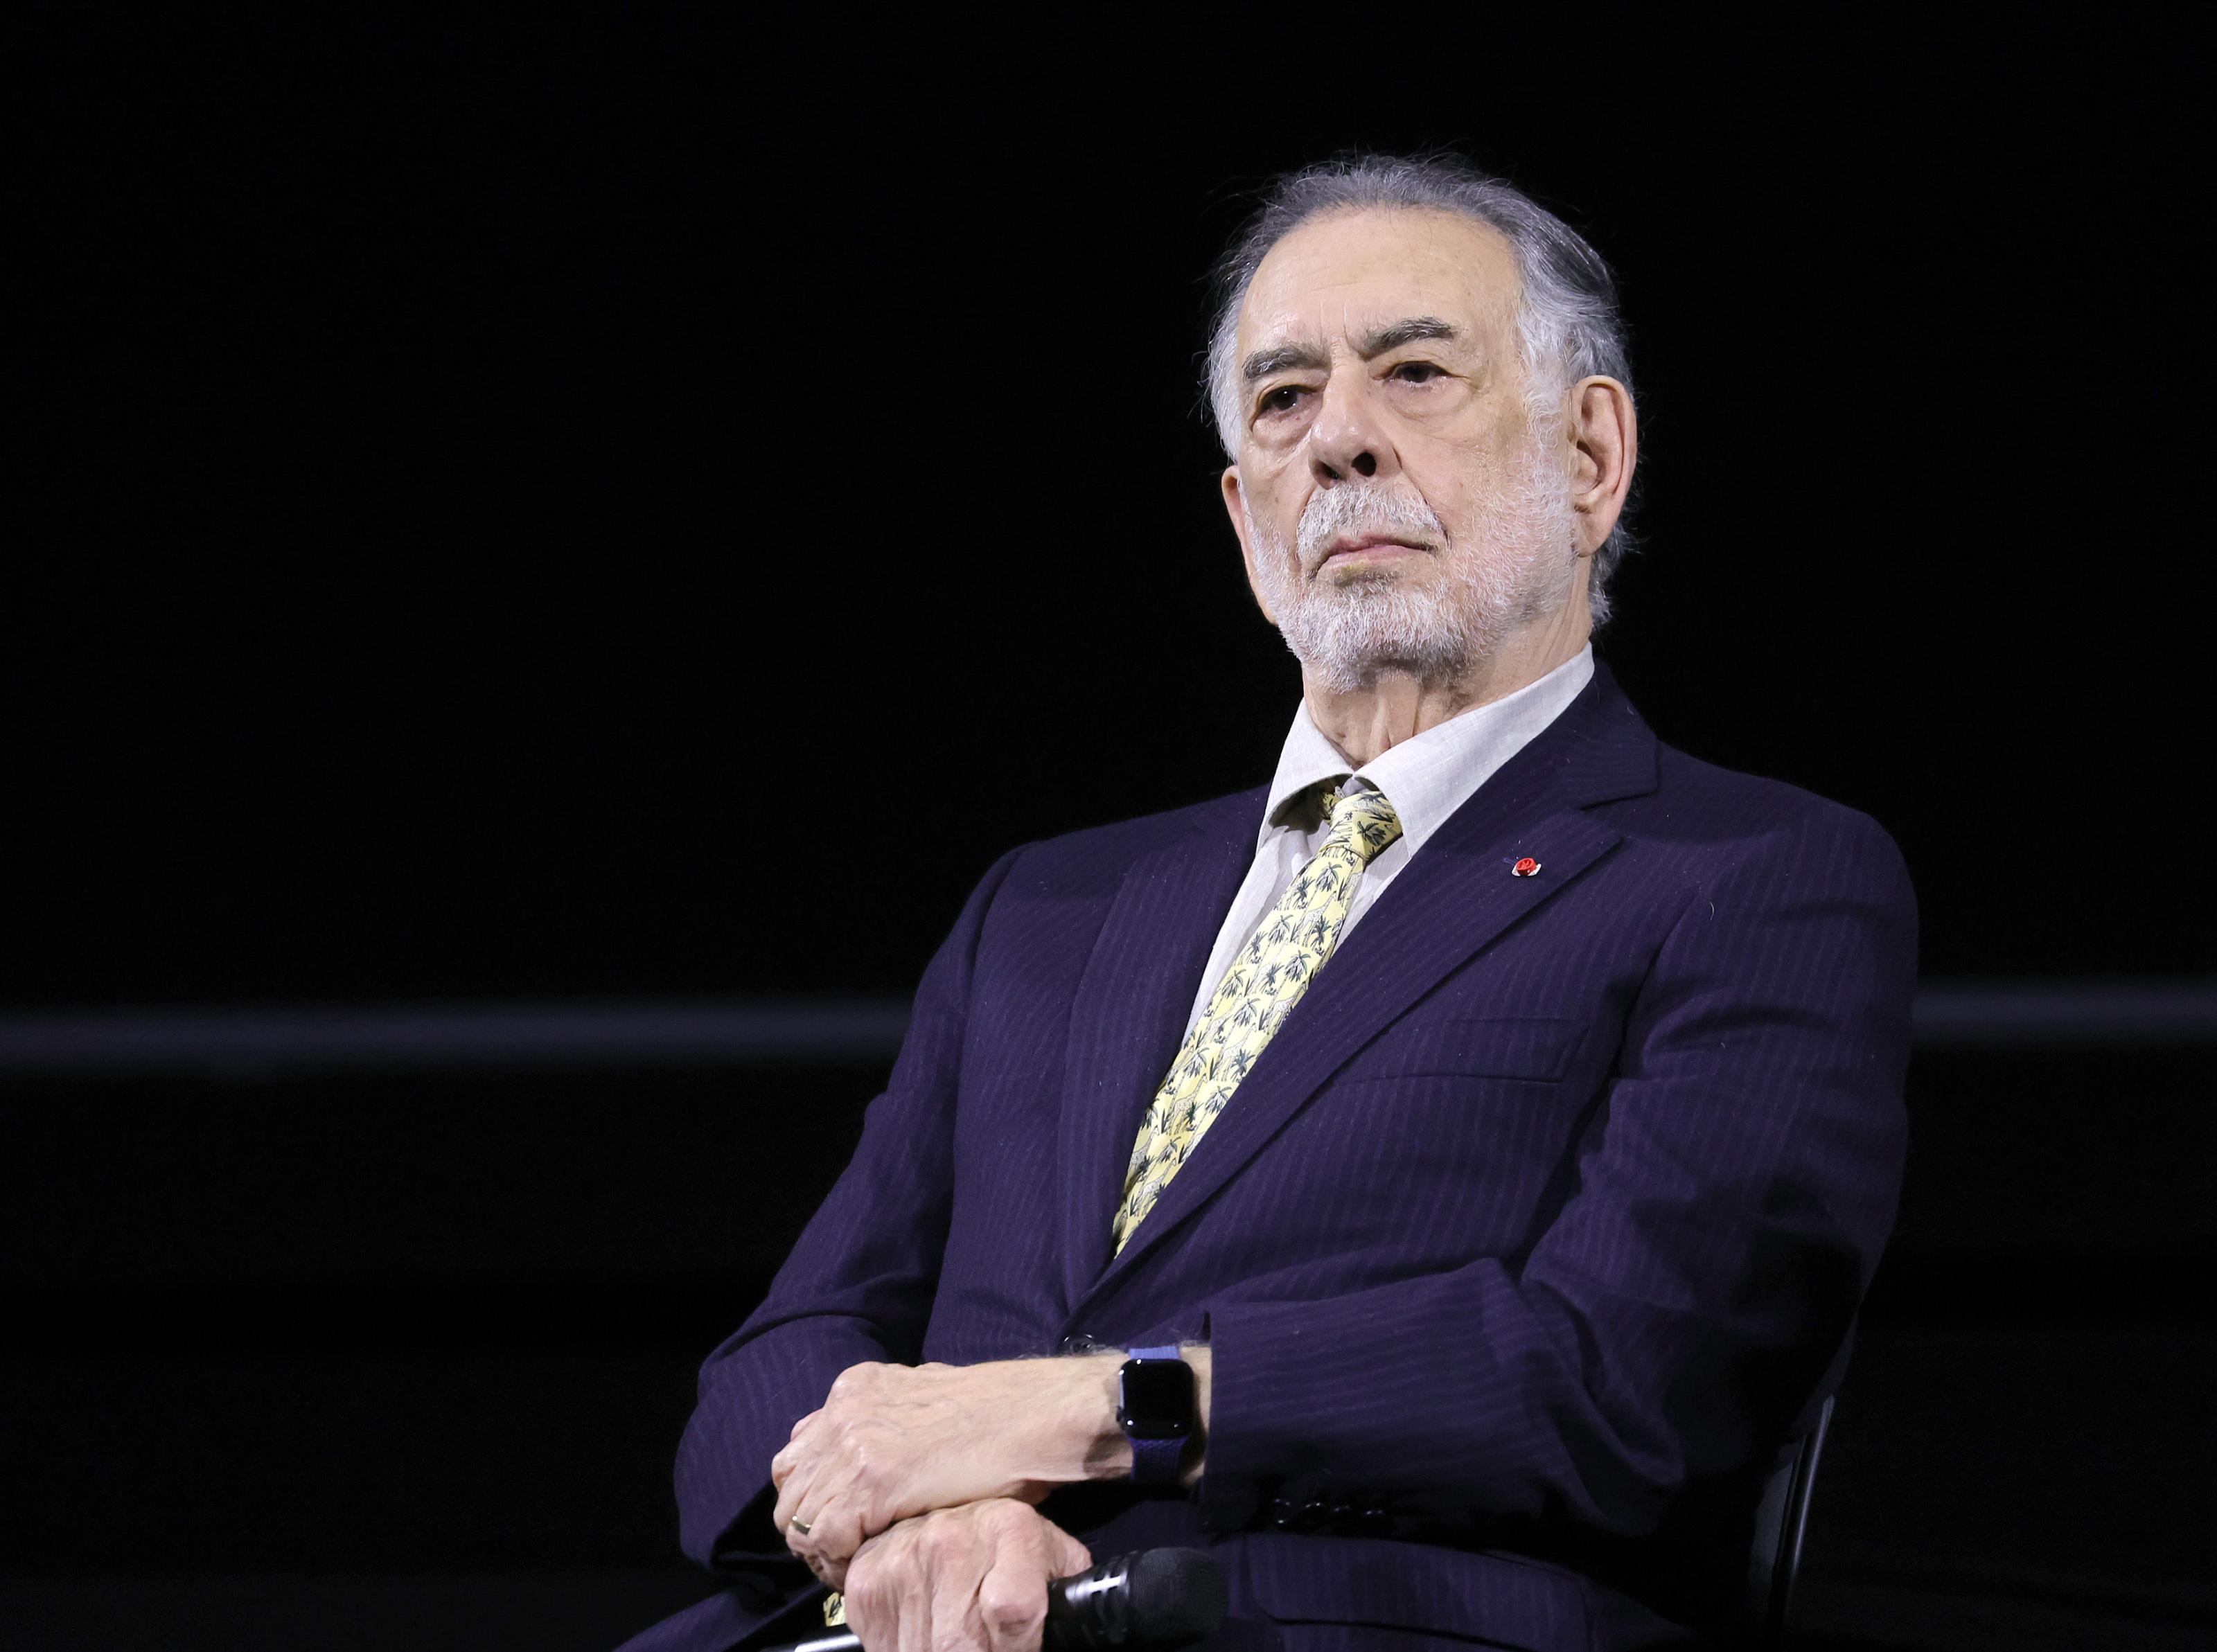 Francis Ford Coppola thinks Marvel movies are despicable.